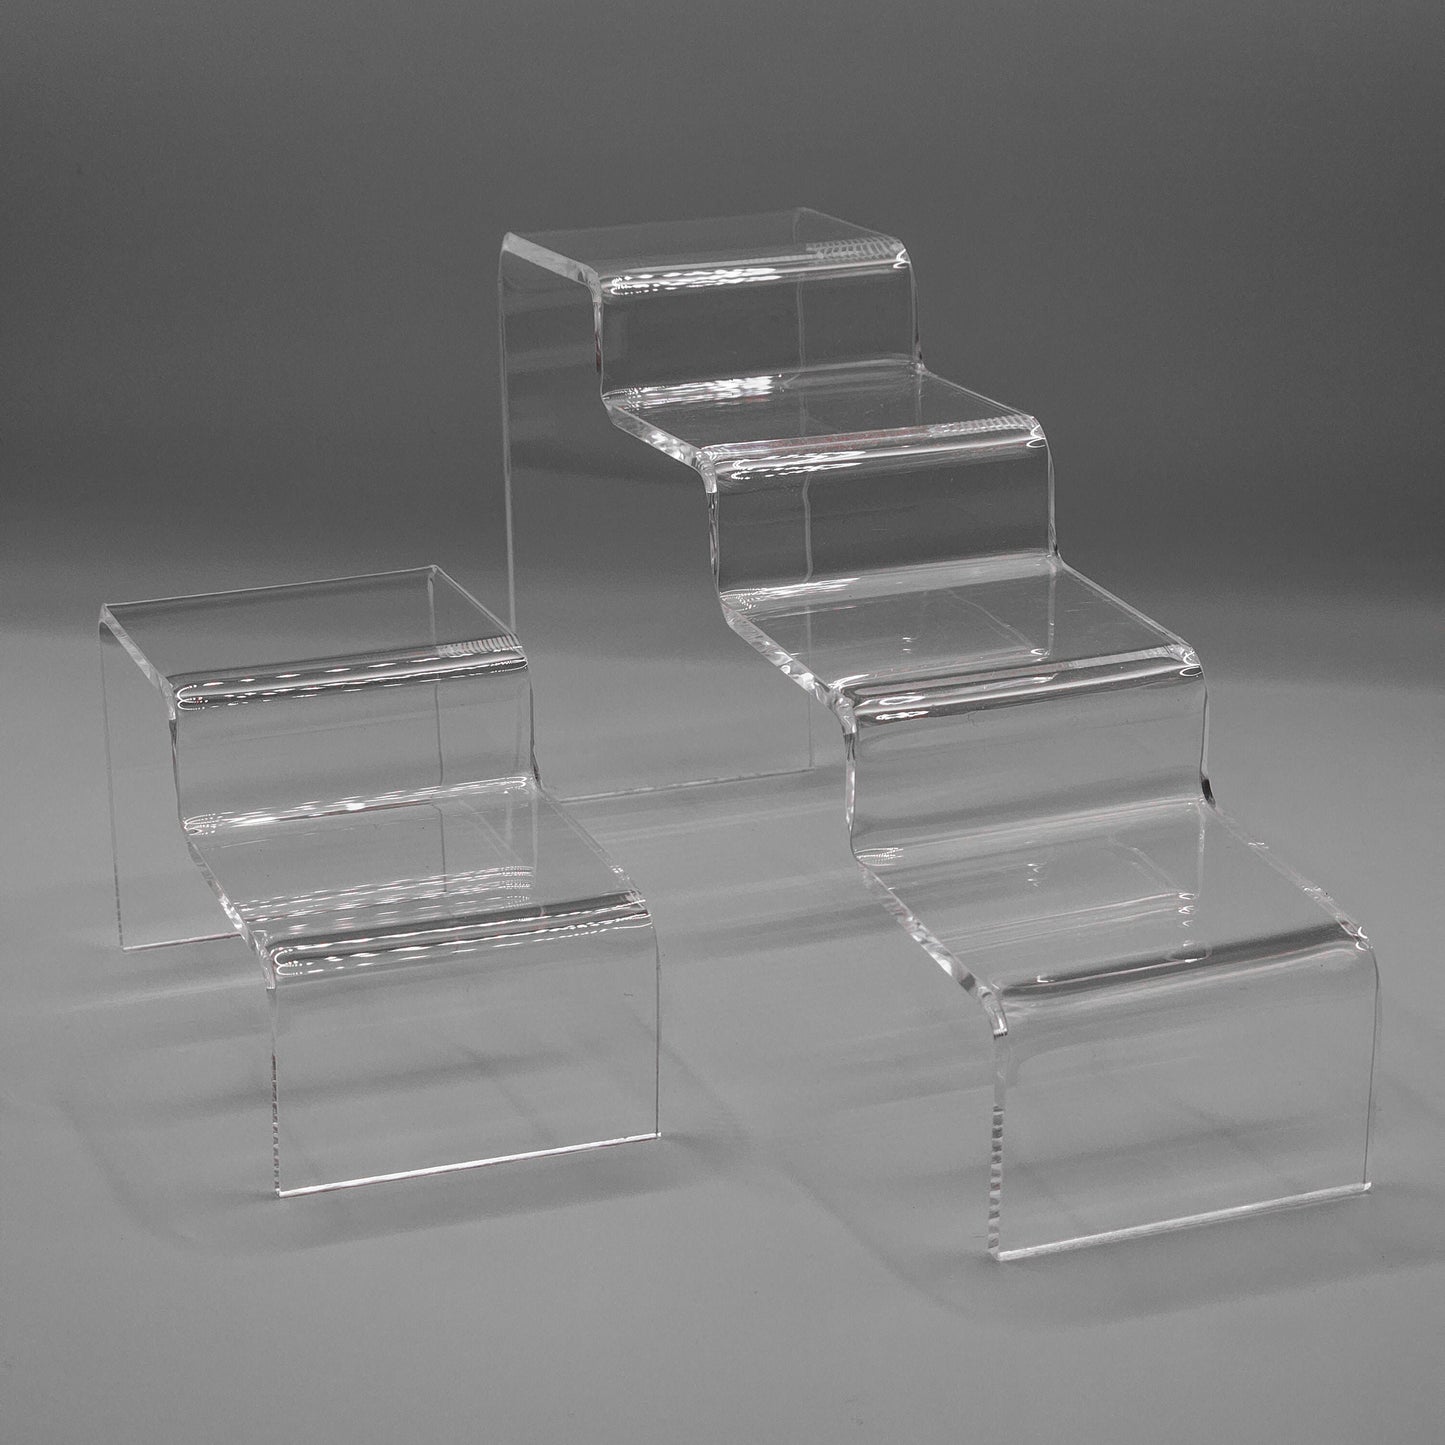 Acrylic Zigzag Tiered Jewellery Step Display Stand | step jewellery crystal display | shop displays, carft market stall  jewellery display stands